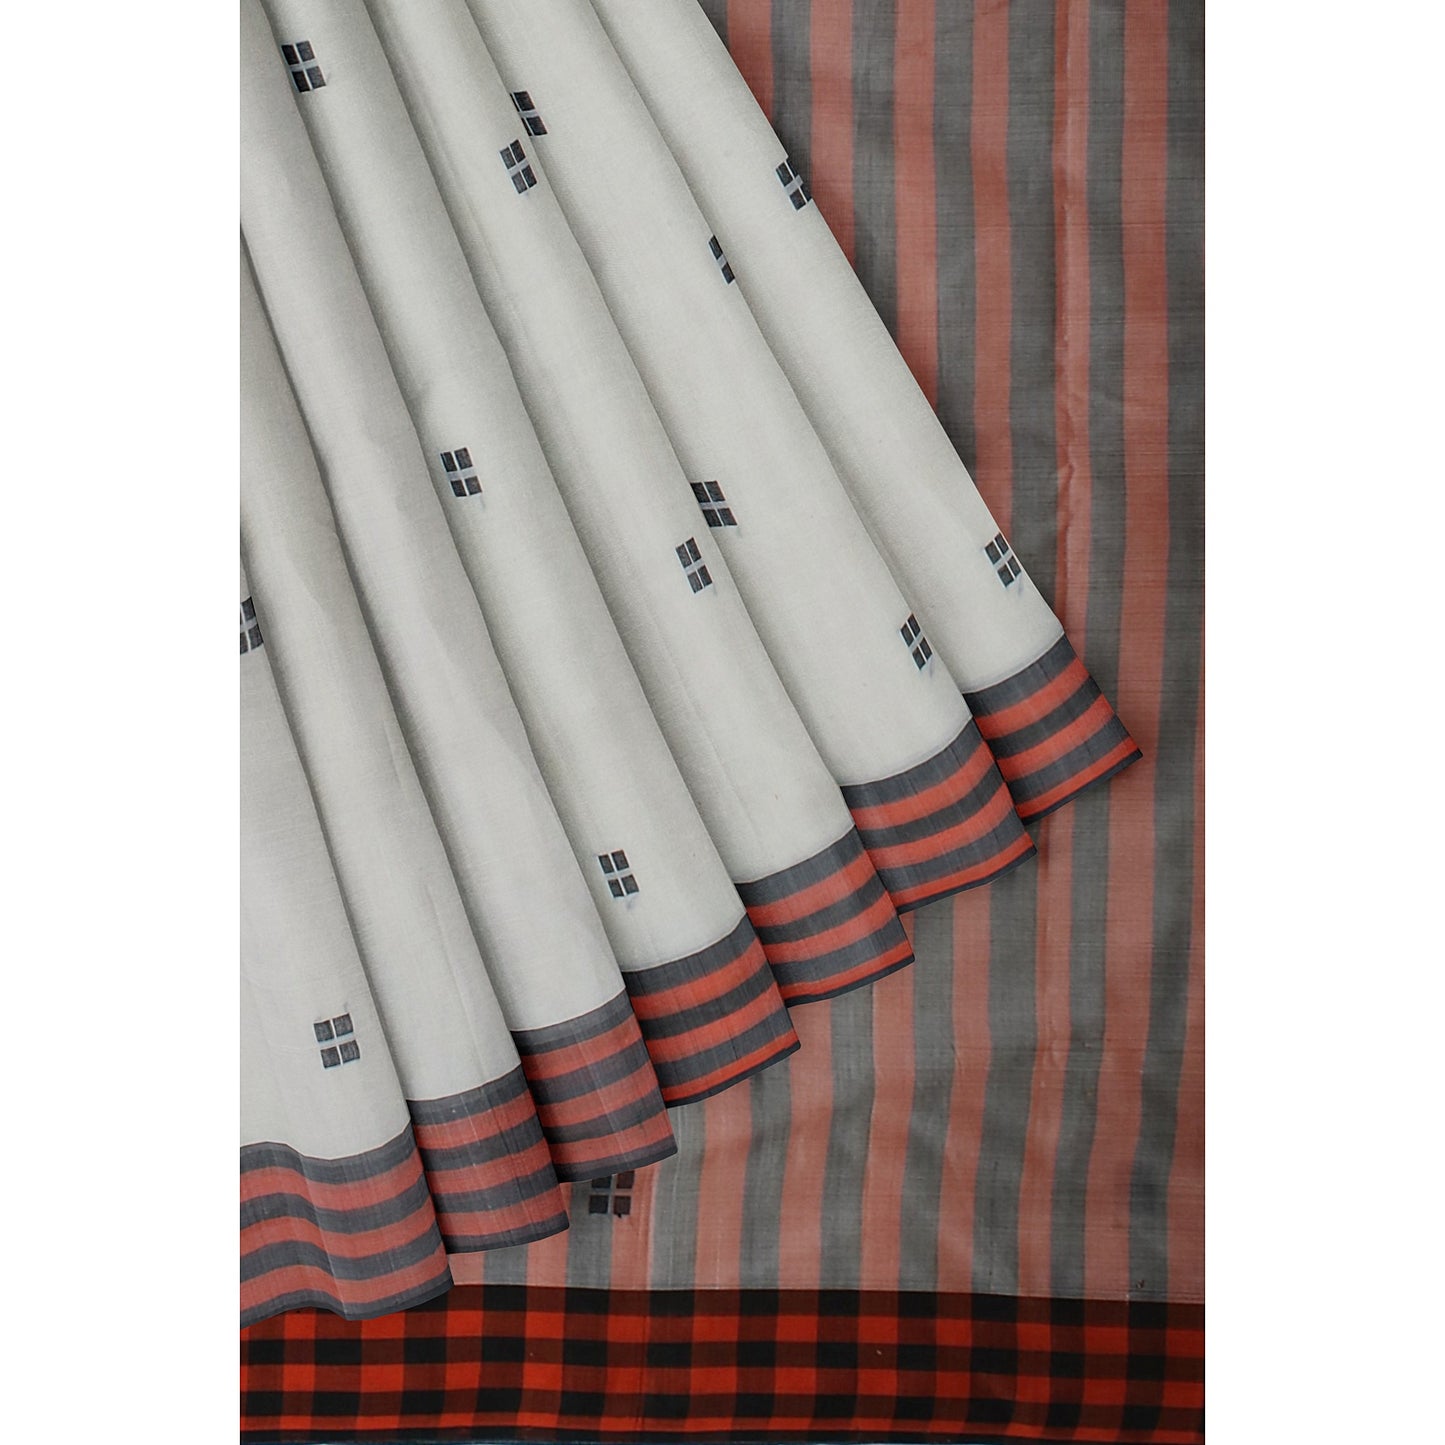 Archa - White Pure Cotton Handloom with Handturned Buta and Stripes Border and Pallu